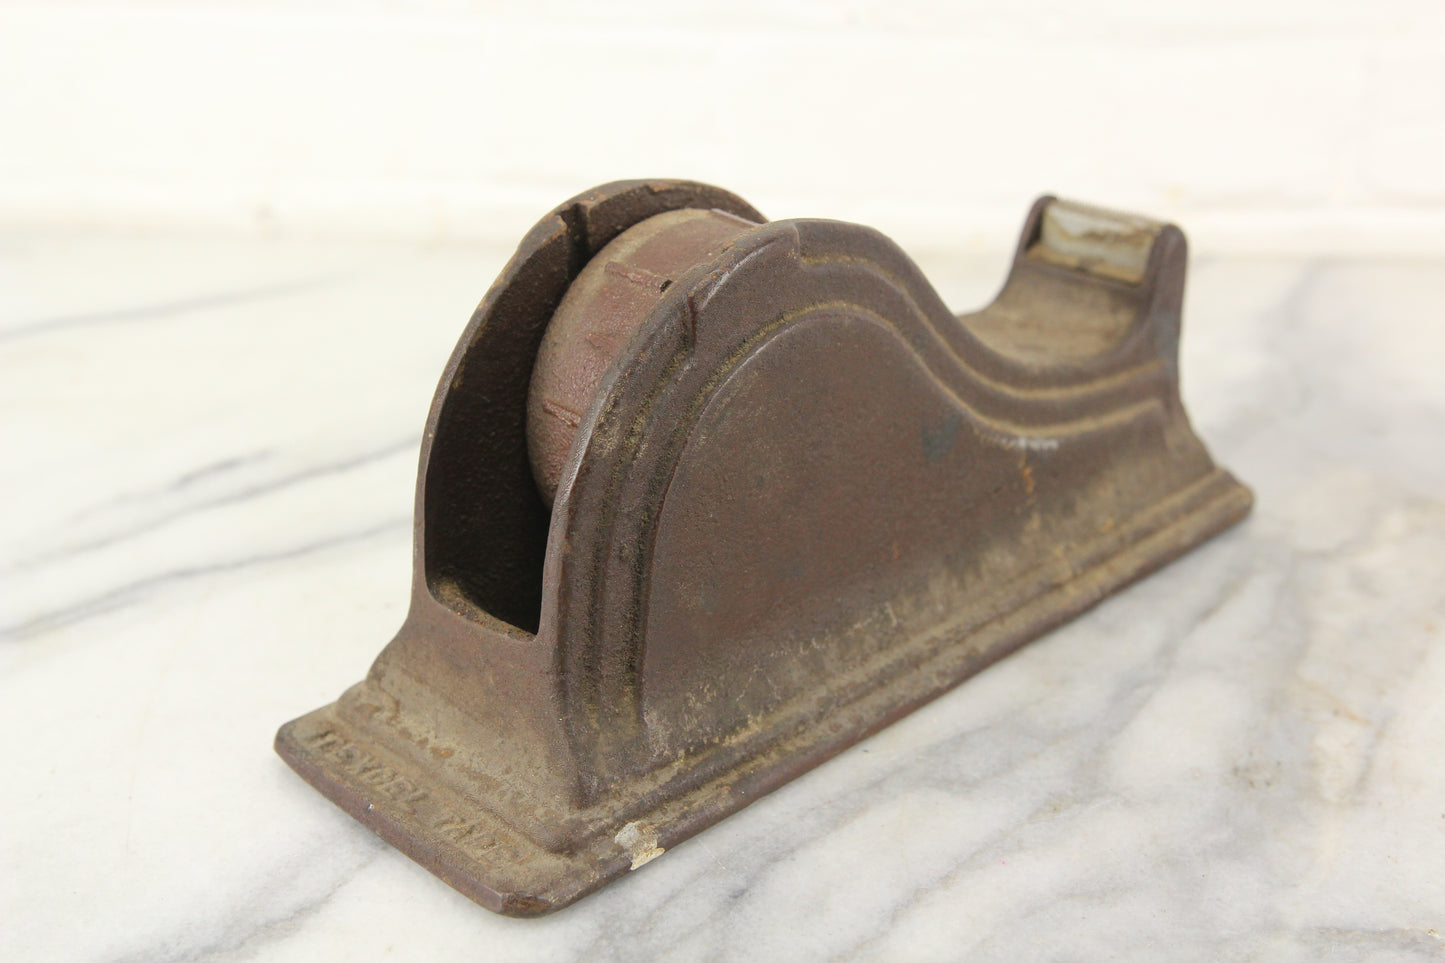 Cast Iron Texcel Tape Dispenser with Core